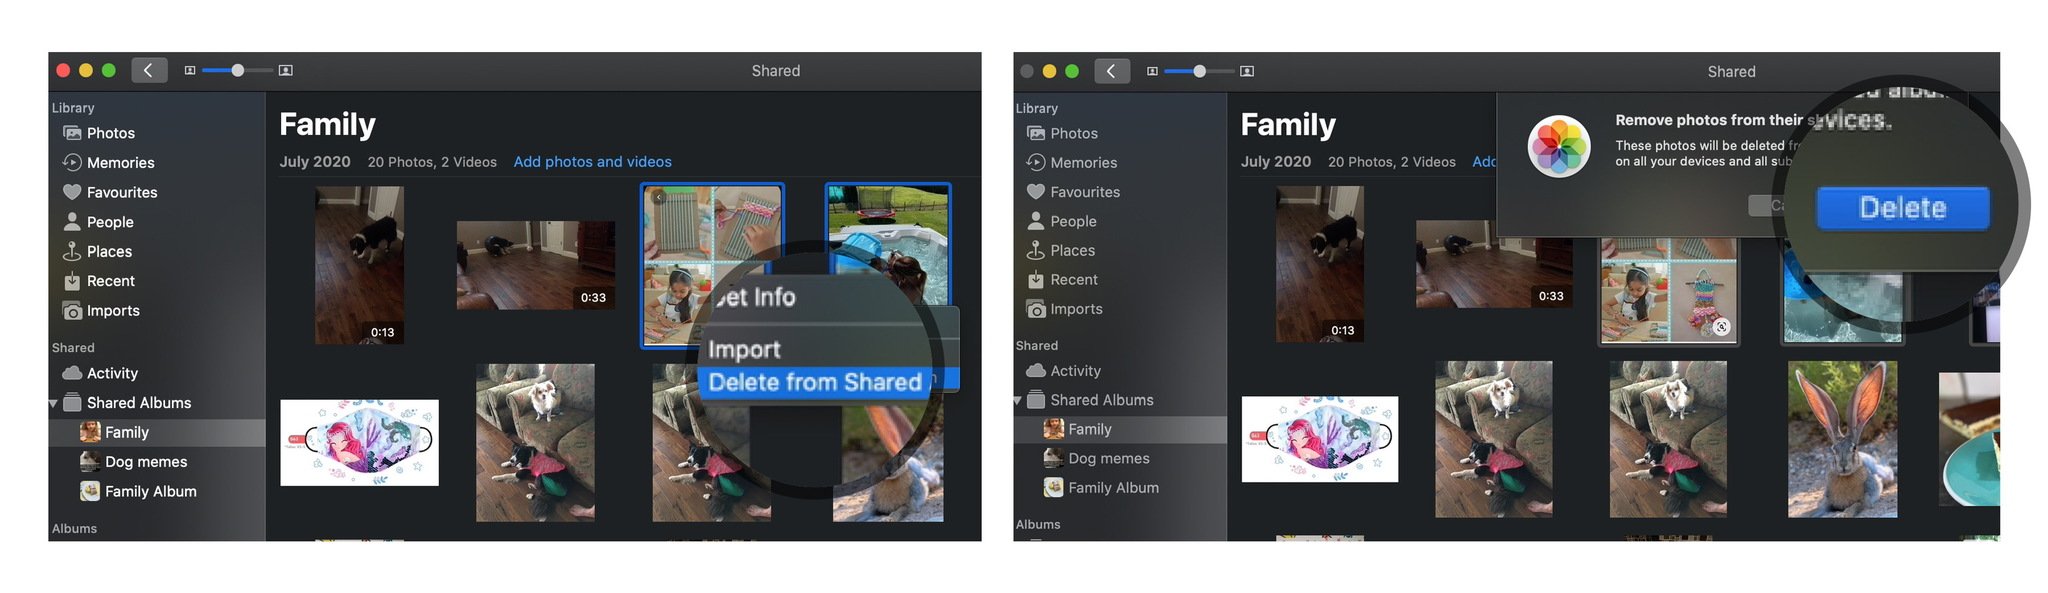 Remove photos or video from Family album on Mac: Right Click, Select Delete, Confirm Delete